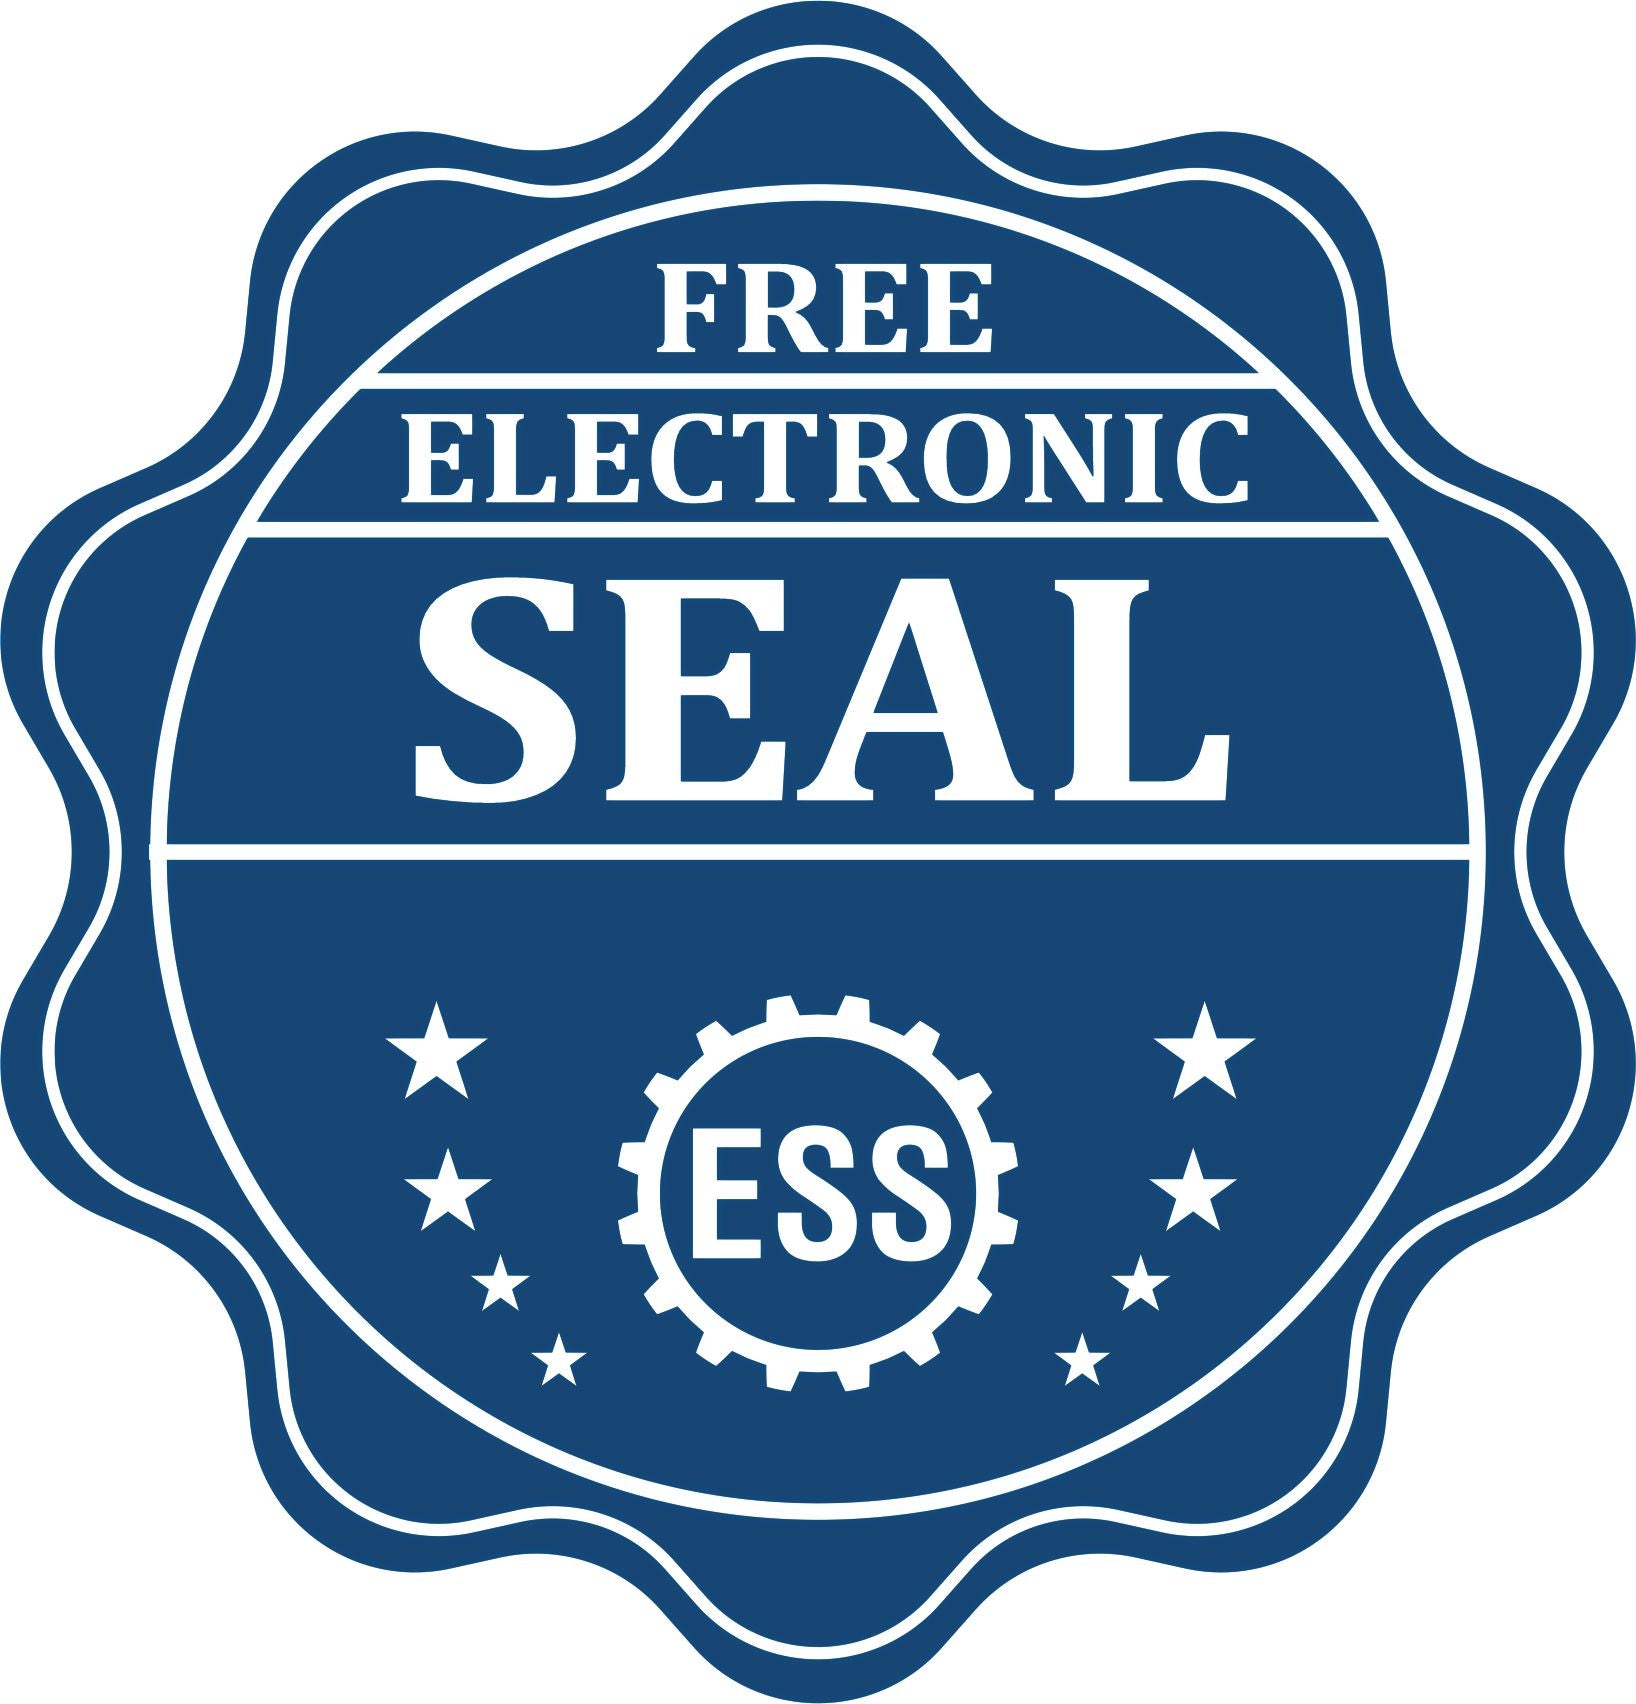 A badge showing a free electronic seal for the State of Colorado Extended Long Reach Engineer Seal with stars and the ESS gear on the emblem.